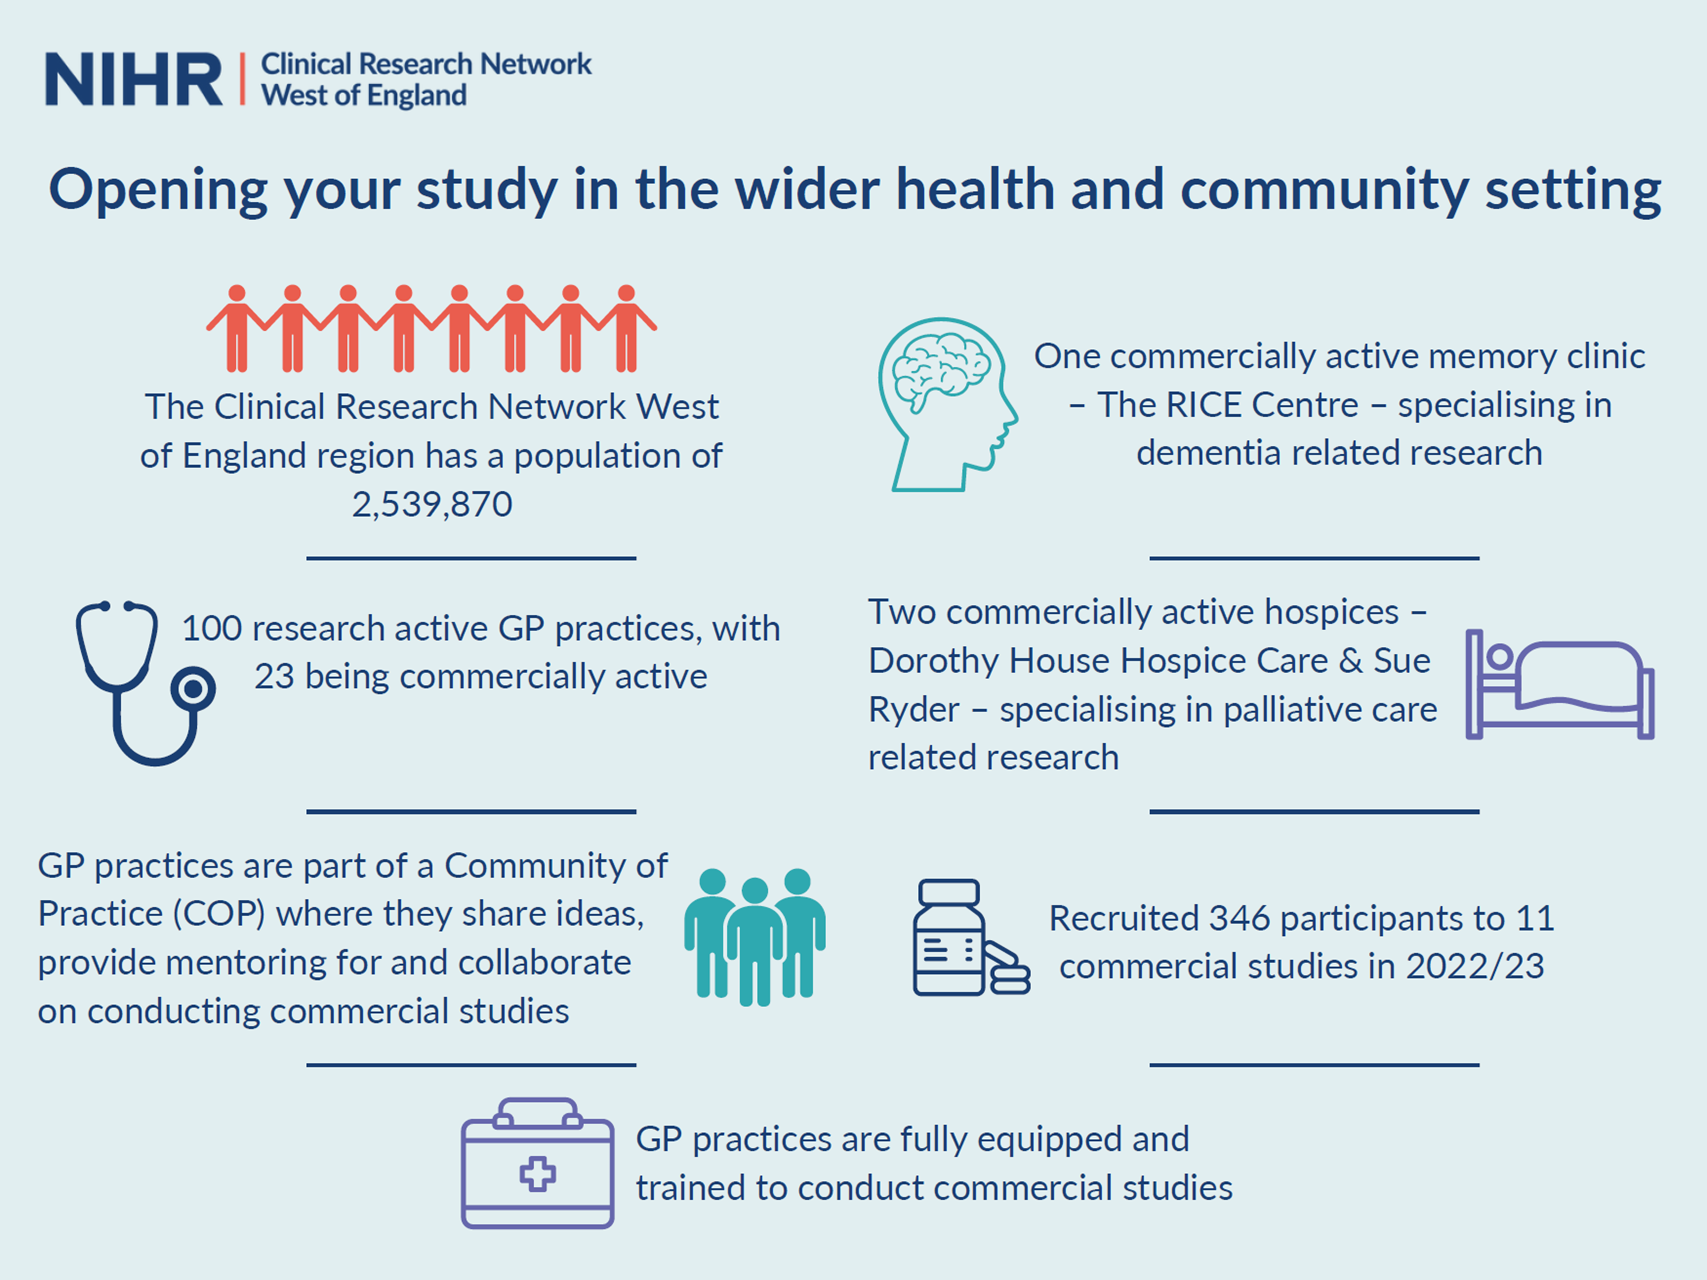 Poster with the following text. Opening your study in the wider health and community setting. The Clinical Research Network West of England region has a population of2,539,870. One commercially active memory clinic– The RICE Centre – specialising in dementia related research. 100 research active GP practices, with 23 being commercially active. Two commercially active hospices Dorothy House Hospice Care & Sue Ryder - specialising in palliative care related research. GP practices are part of a Community of Practice (COP) where they share ideas, provide mentoring for and collaborate on conducting commercial studies. Recruited 346 participants to 11 commercial studies in 2022/23. GP practices are fully equipped and trained to conduct commercial studies.